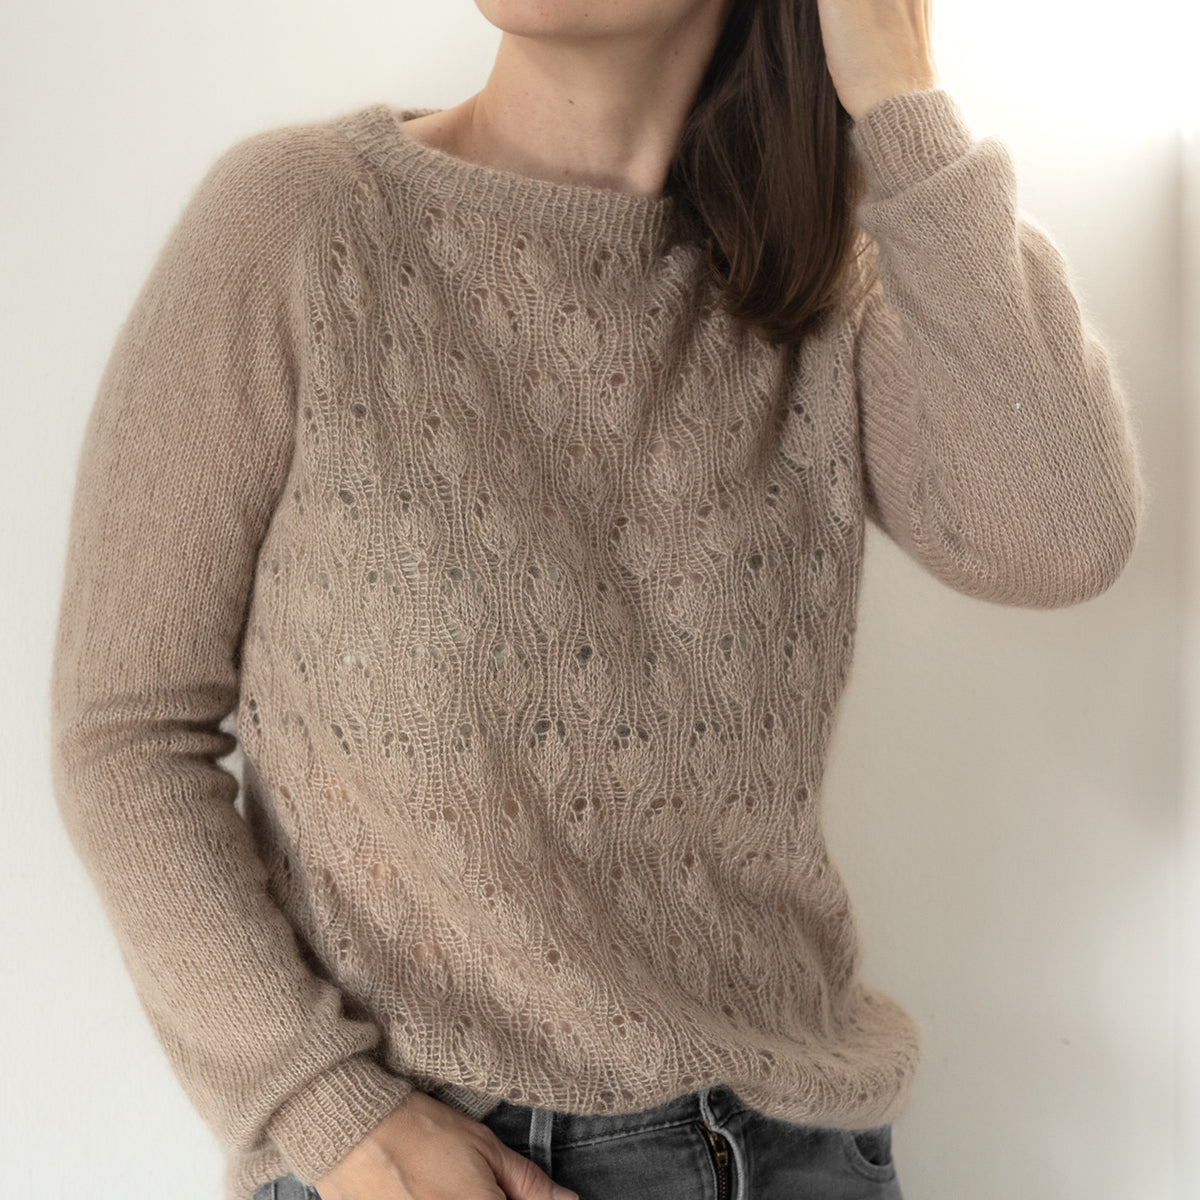 Mohair sweater No 1- Knitting pattern